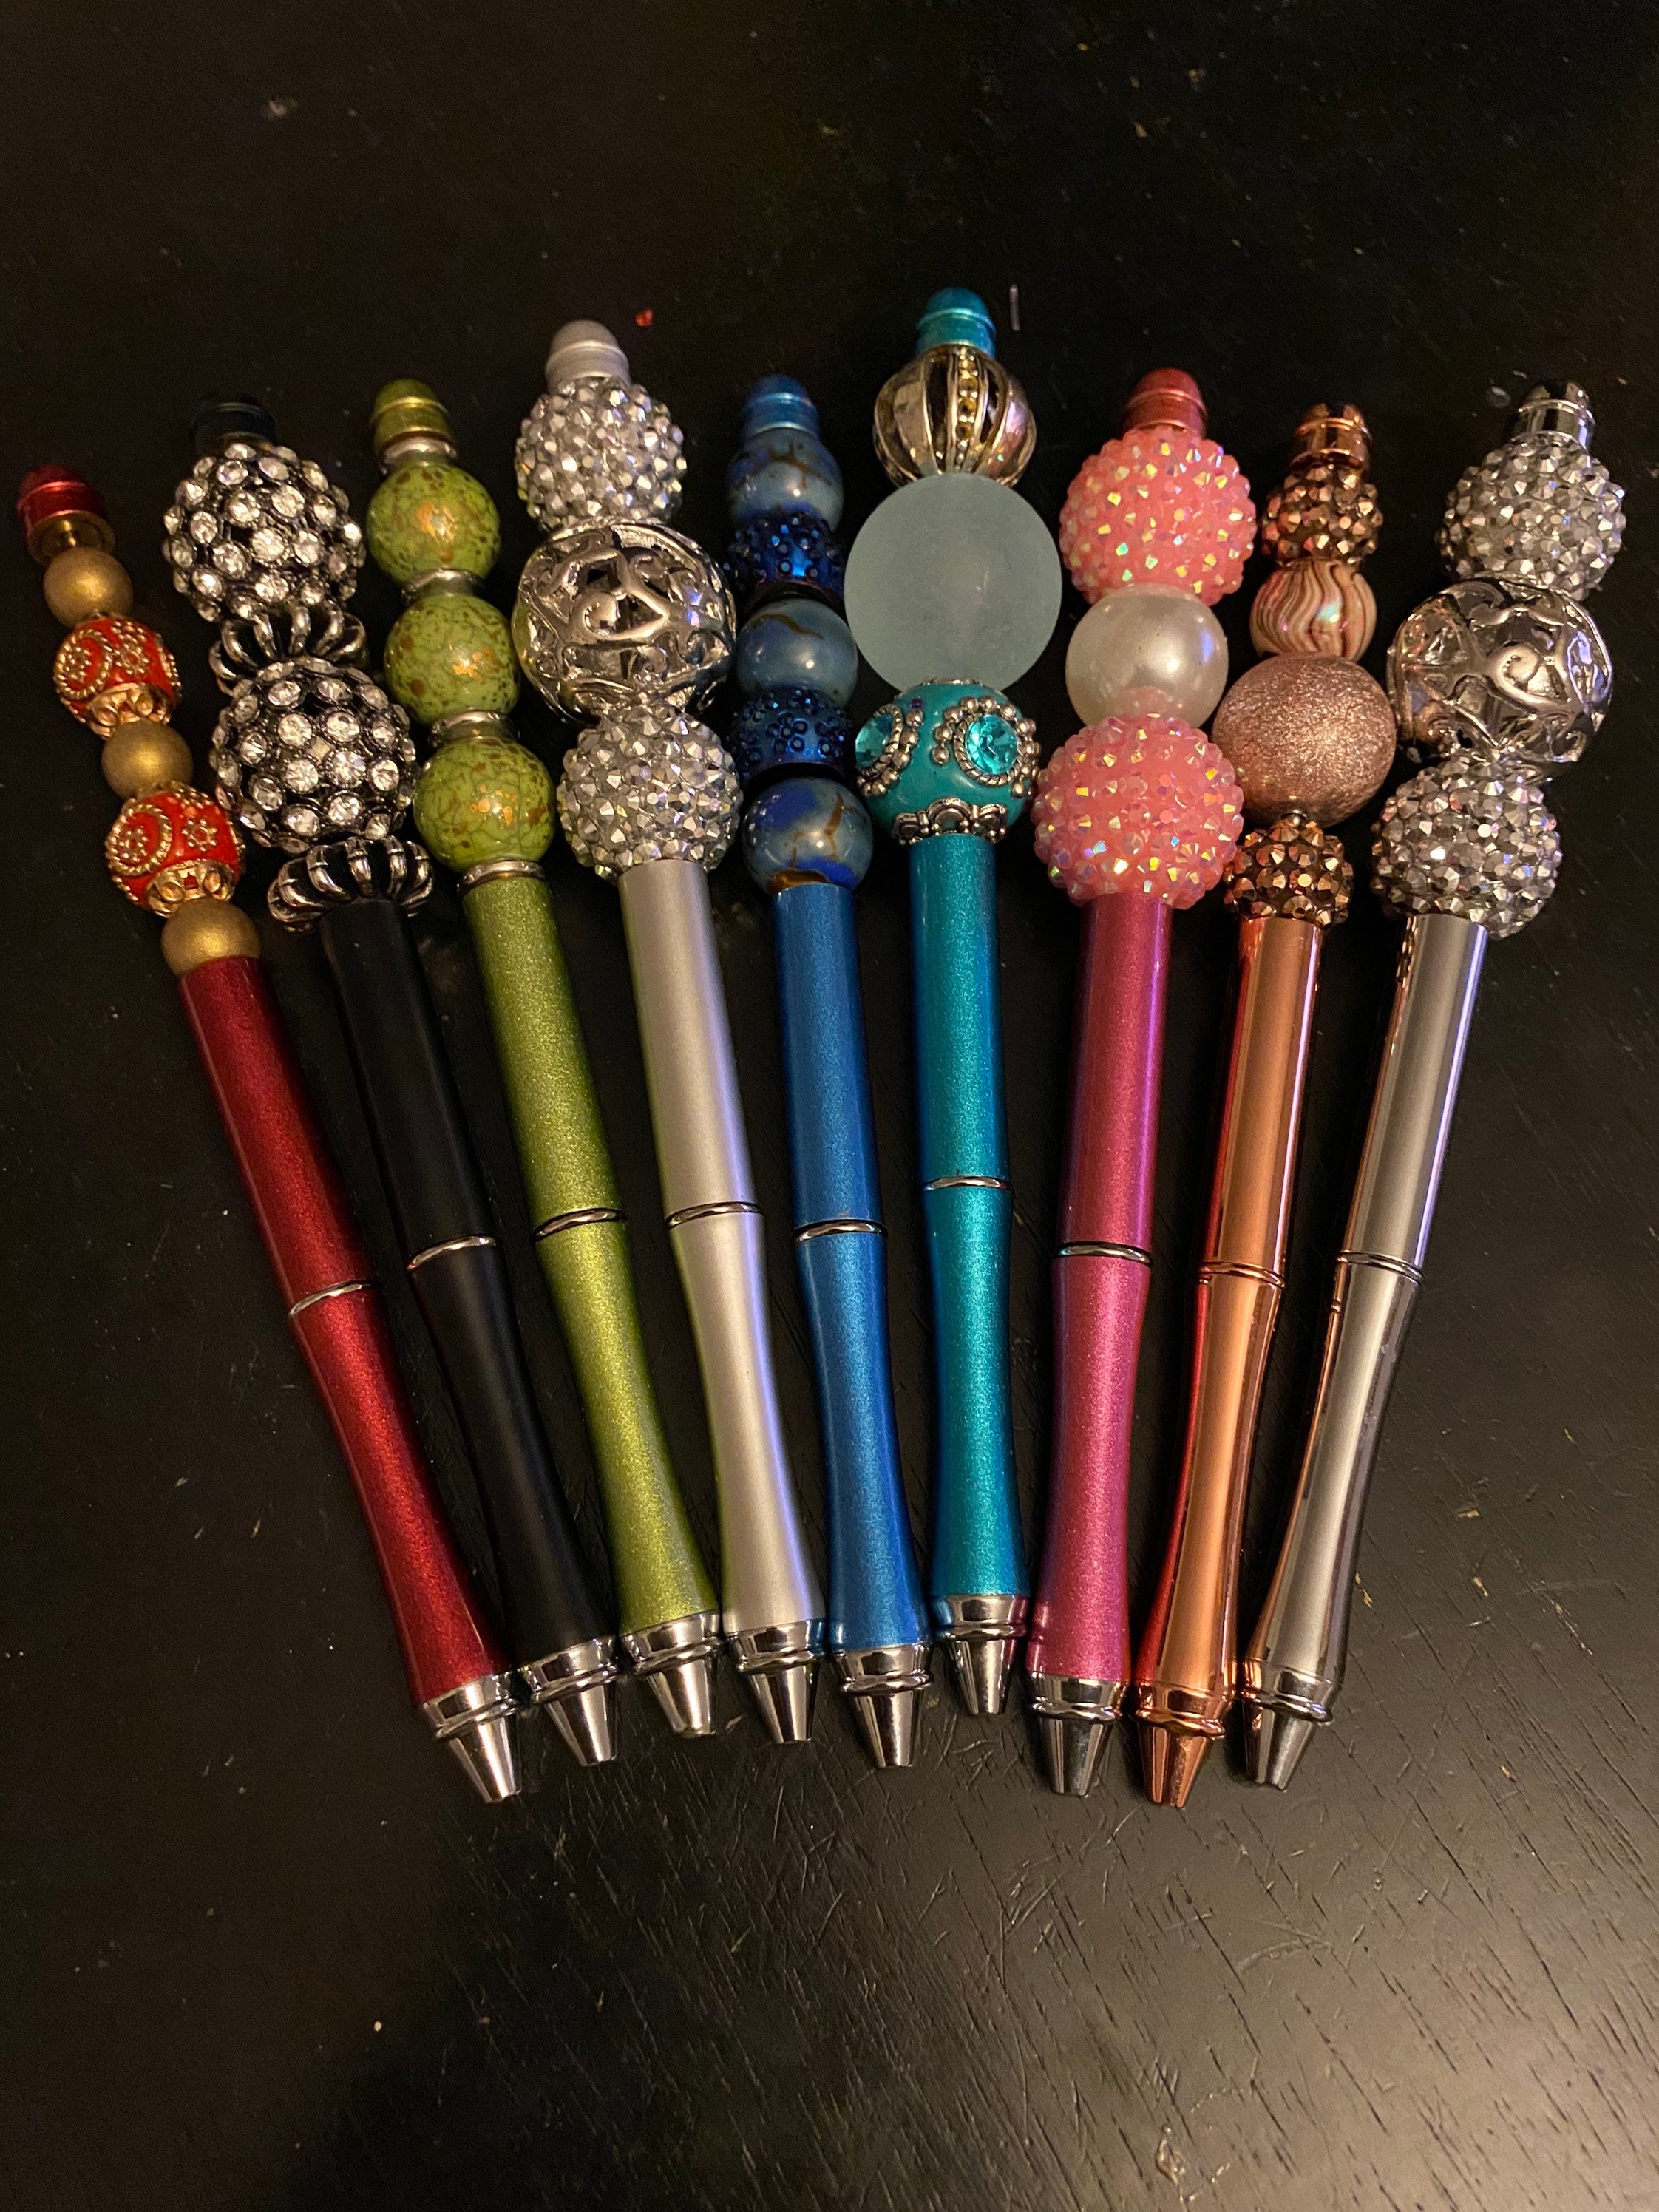 Creative DIY Beaded Pens With Top Bicone Bolds Wholesale Buddha Jewelry  Novelty Decorative Pens From Sdshoes, $0.25